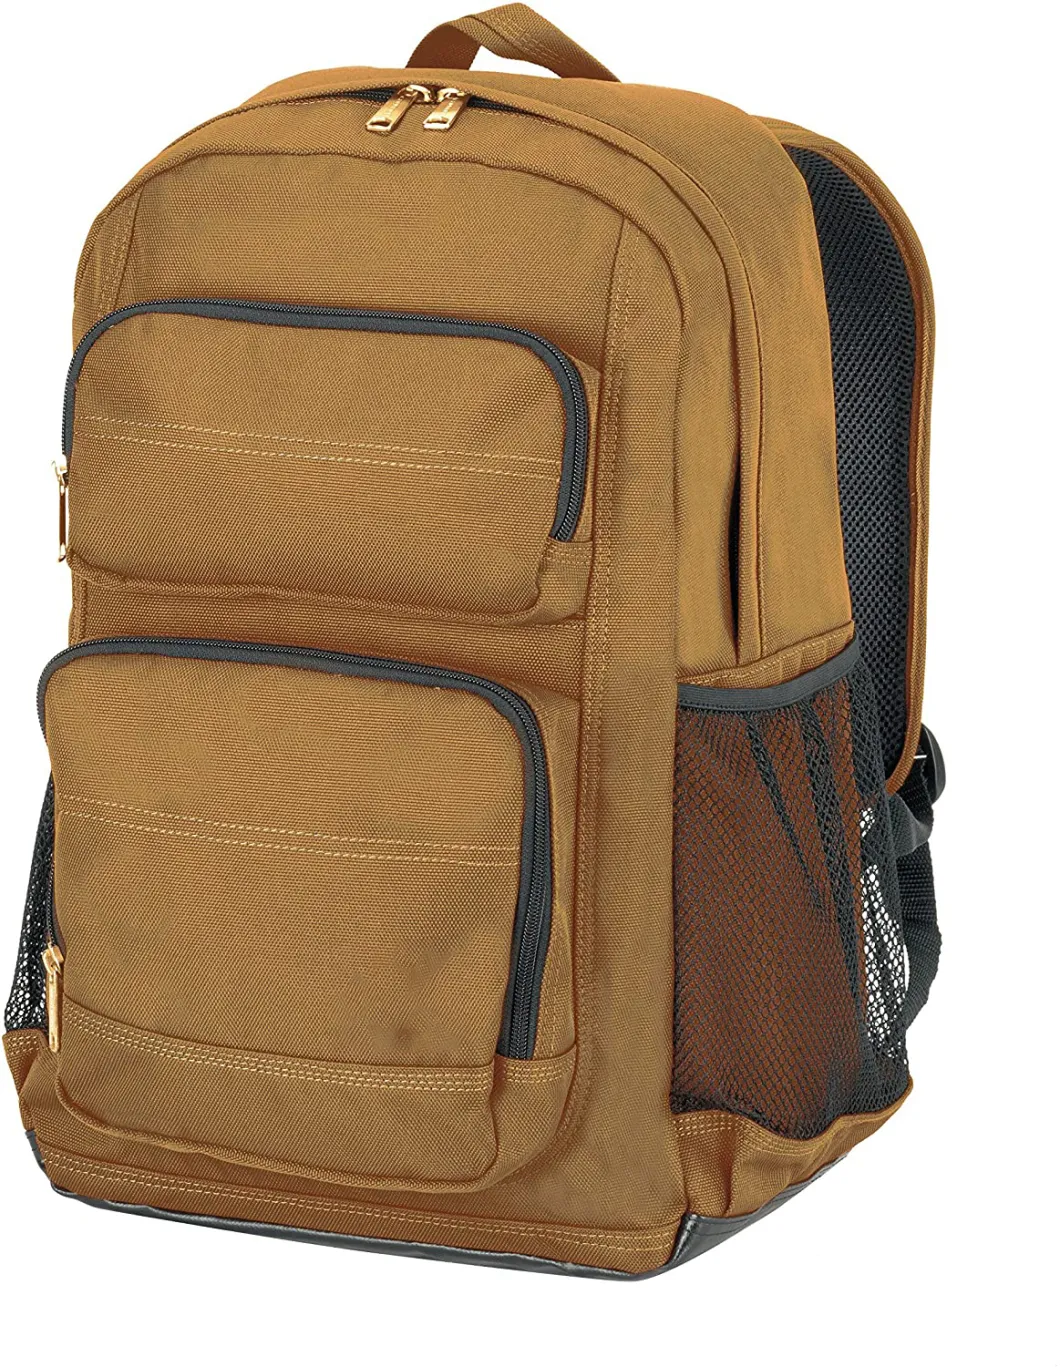 2021 New Arrival Standard Work Backpack with Padded Laptop Sleeve and Tablet Storage